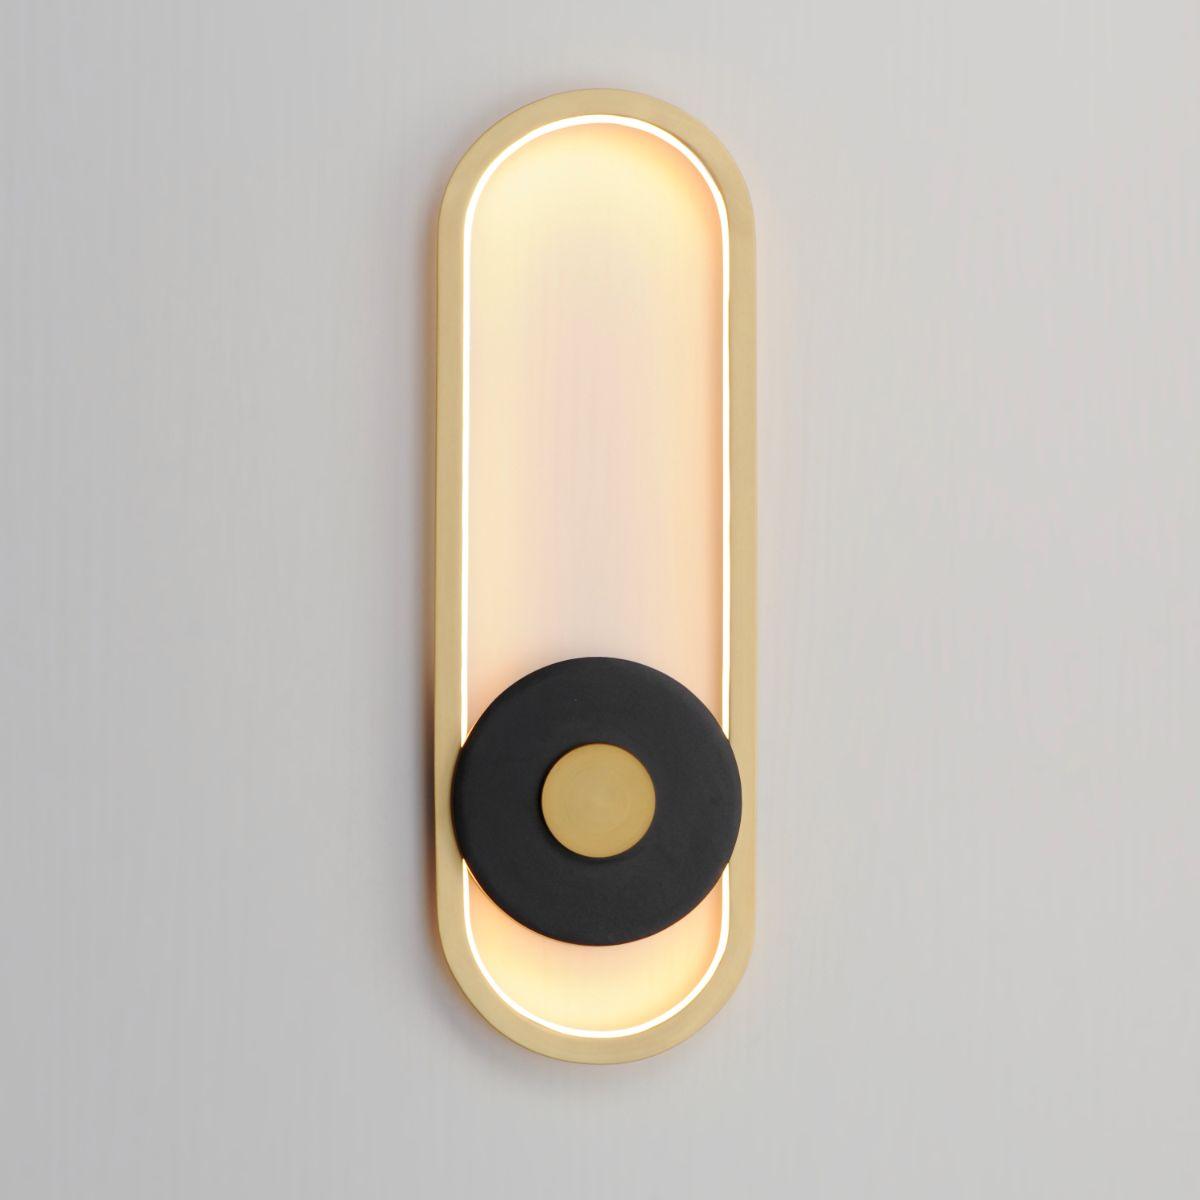 Gravity 18 in. LED Outdoor Wall Sconce 3000K Black & Gold Finish